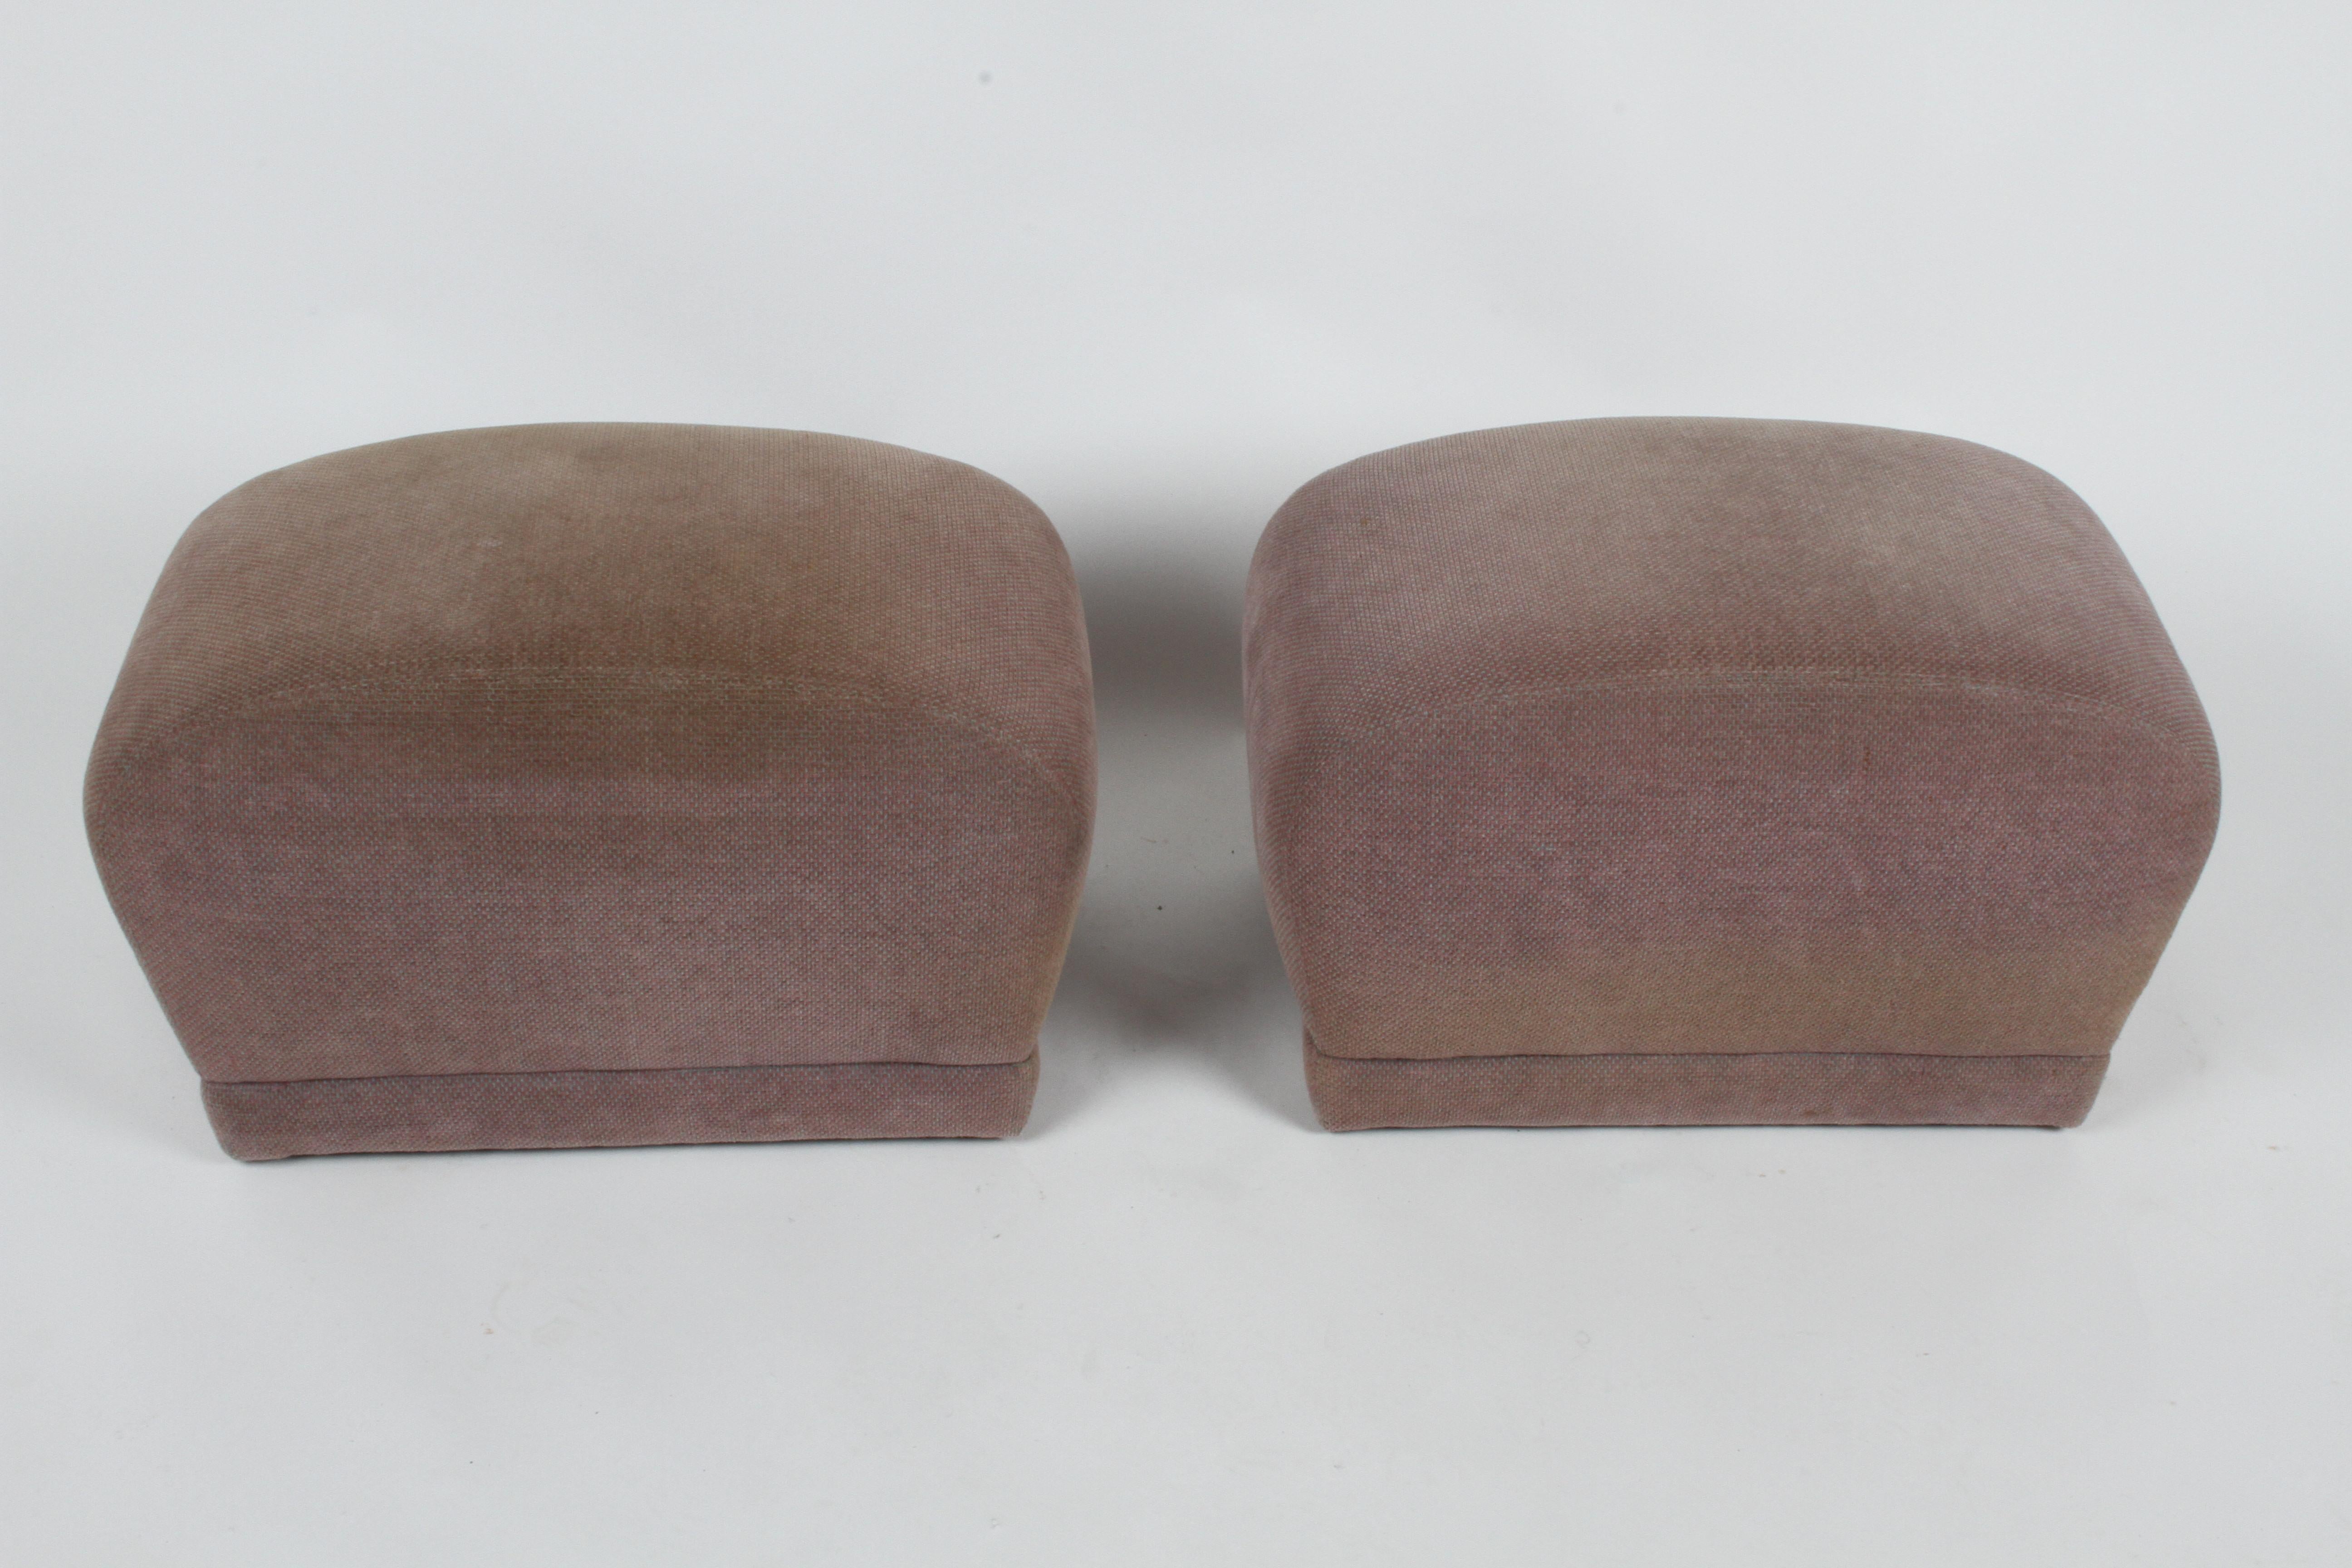 Hollywood Regency Pair of 1980's Upholstered Poufs or Ottomans on Castors, Style of Milo Baughman